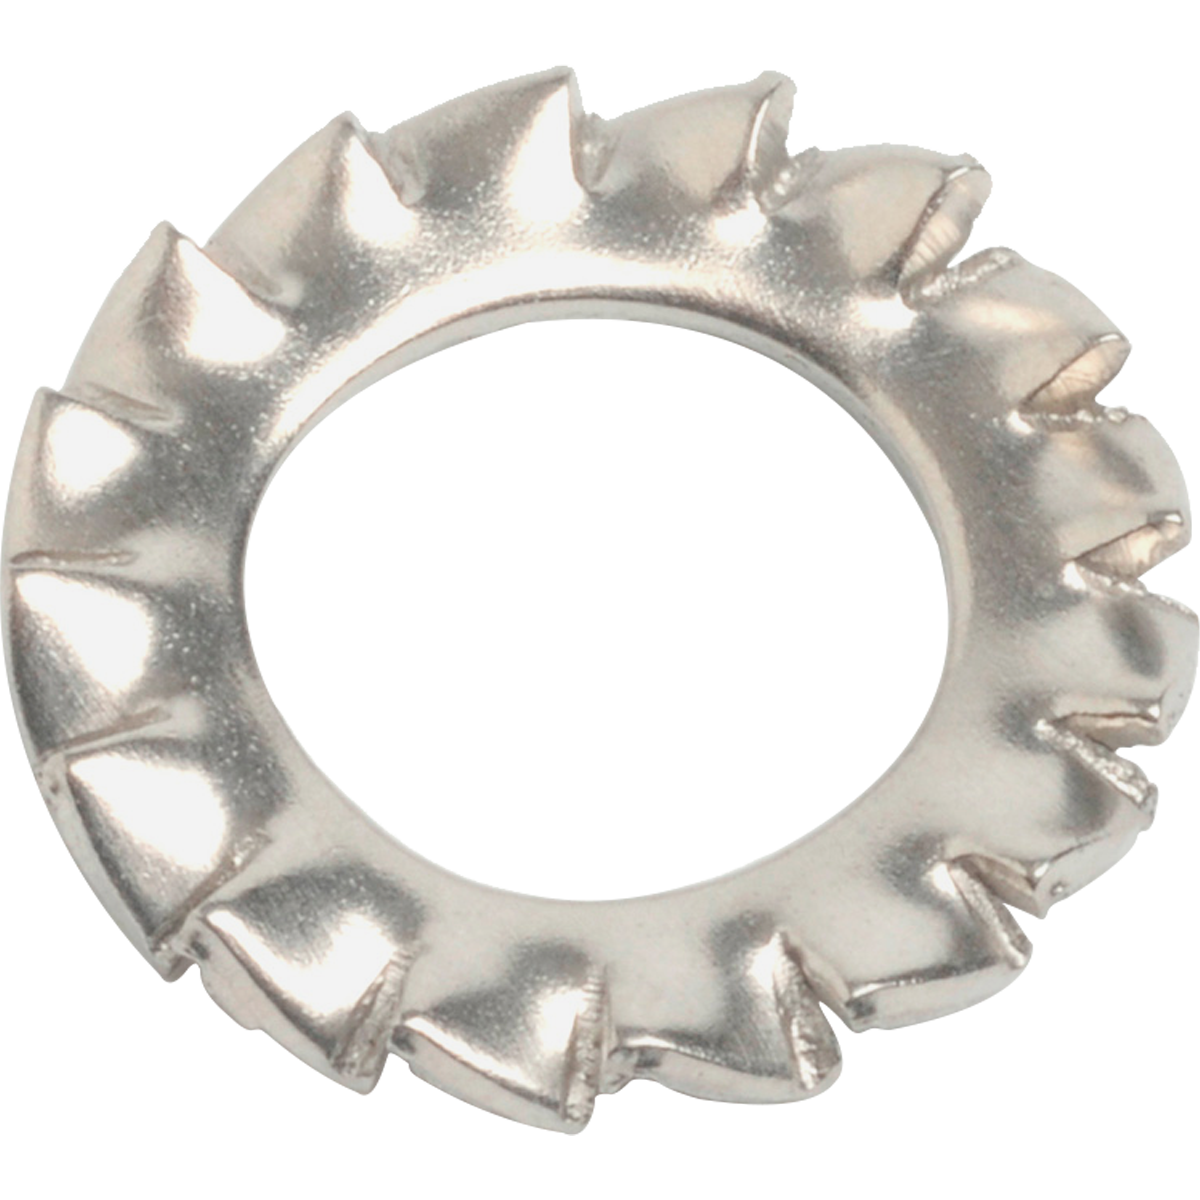 Serrated washers are also known as tooth lock washers, or serrated lock washers. Used to add grip and help with tightening nuts and bolts in areas where vibration might be ab issue.